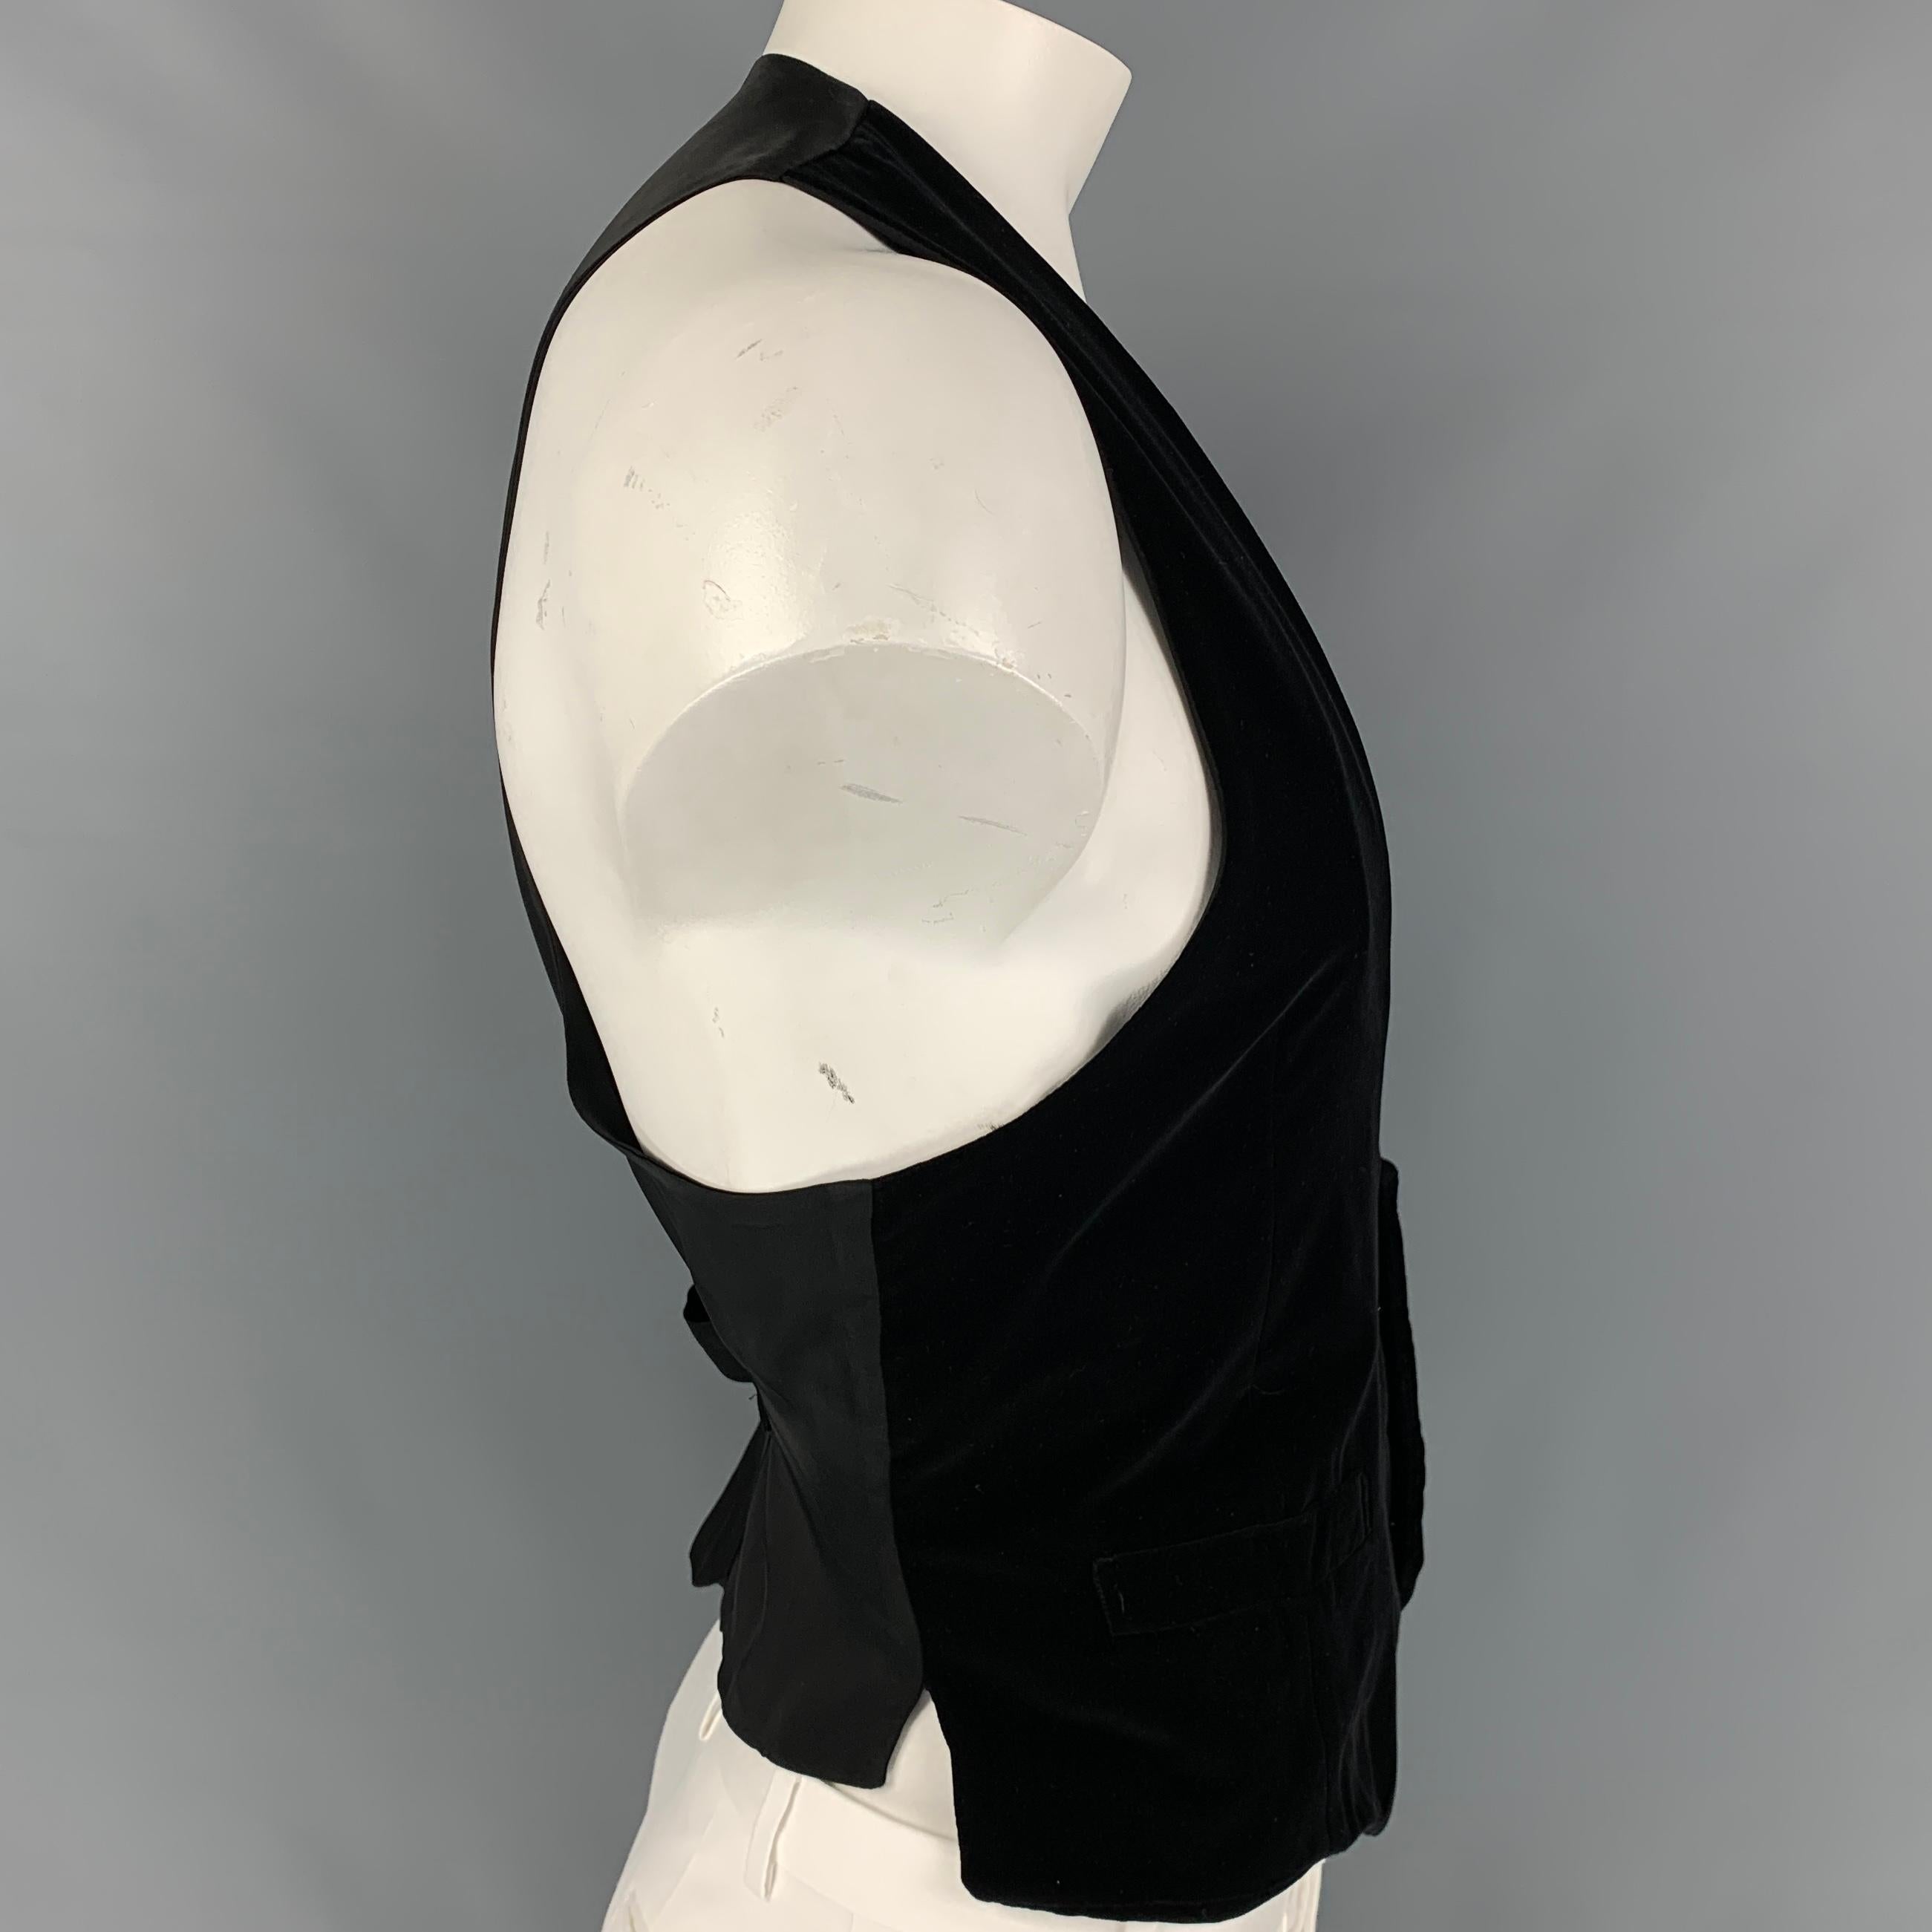 GIORGIO ARMANI vest comes in a black velvet cotton / silk featuring a deep v-neck, back belt, slit pockets, and a buttoned closure. Made in Italy. 

Very Good Pre-Owned Condition.
Marked: 56/46

Measurements:

Shoulder: 13 in.
Chest: 42 in.
Length: